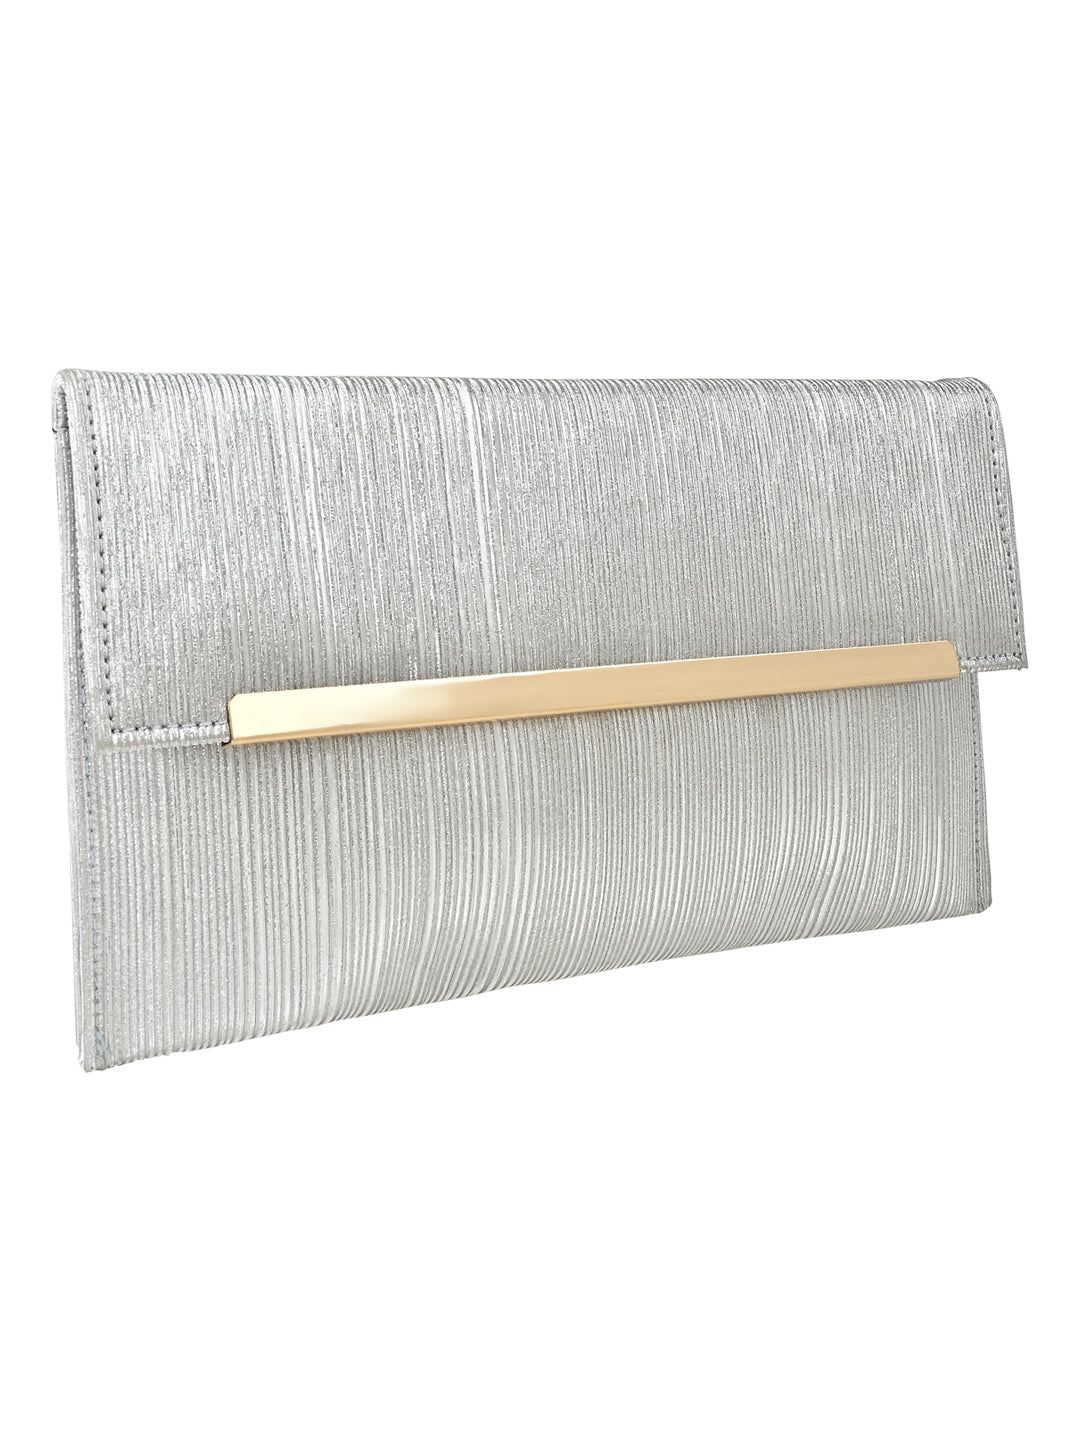 A Vdesi envelope clutch on a plain white background. 